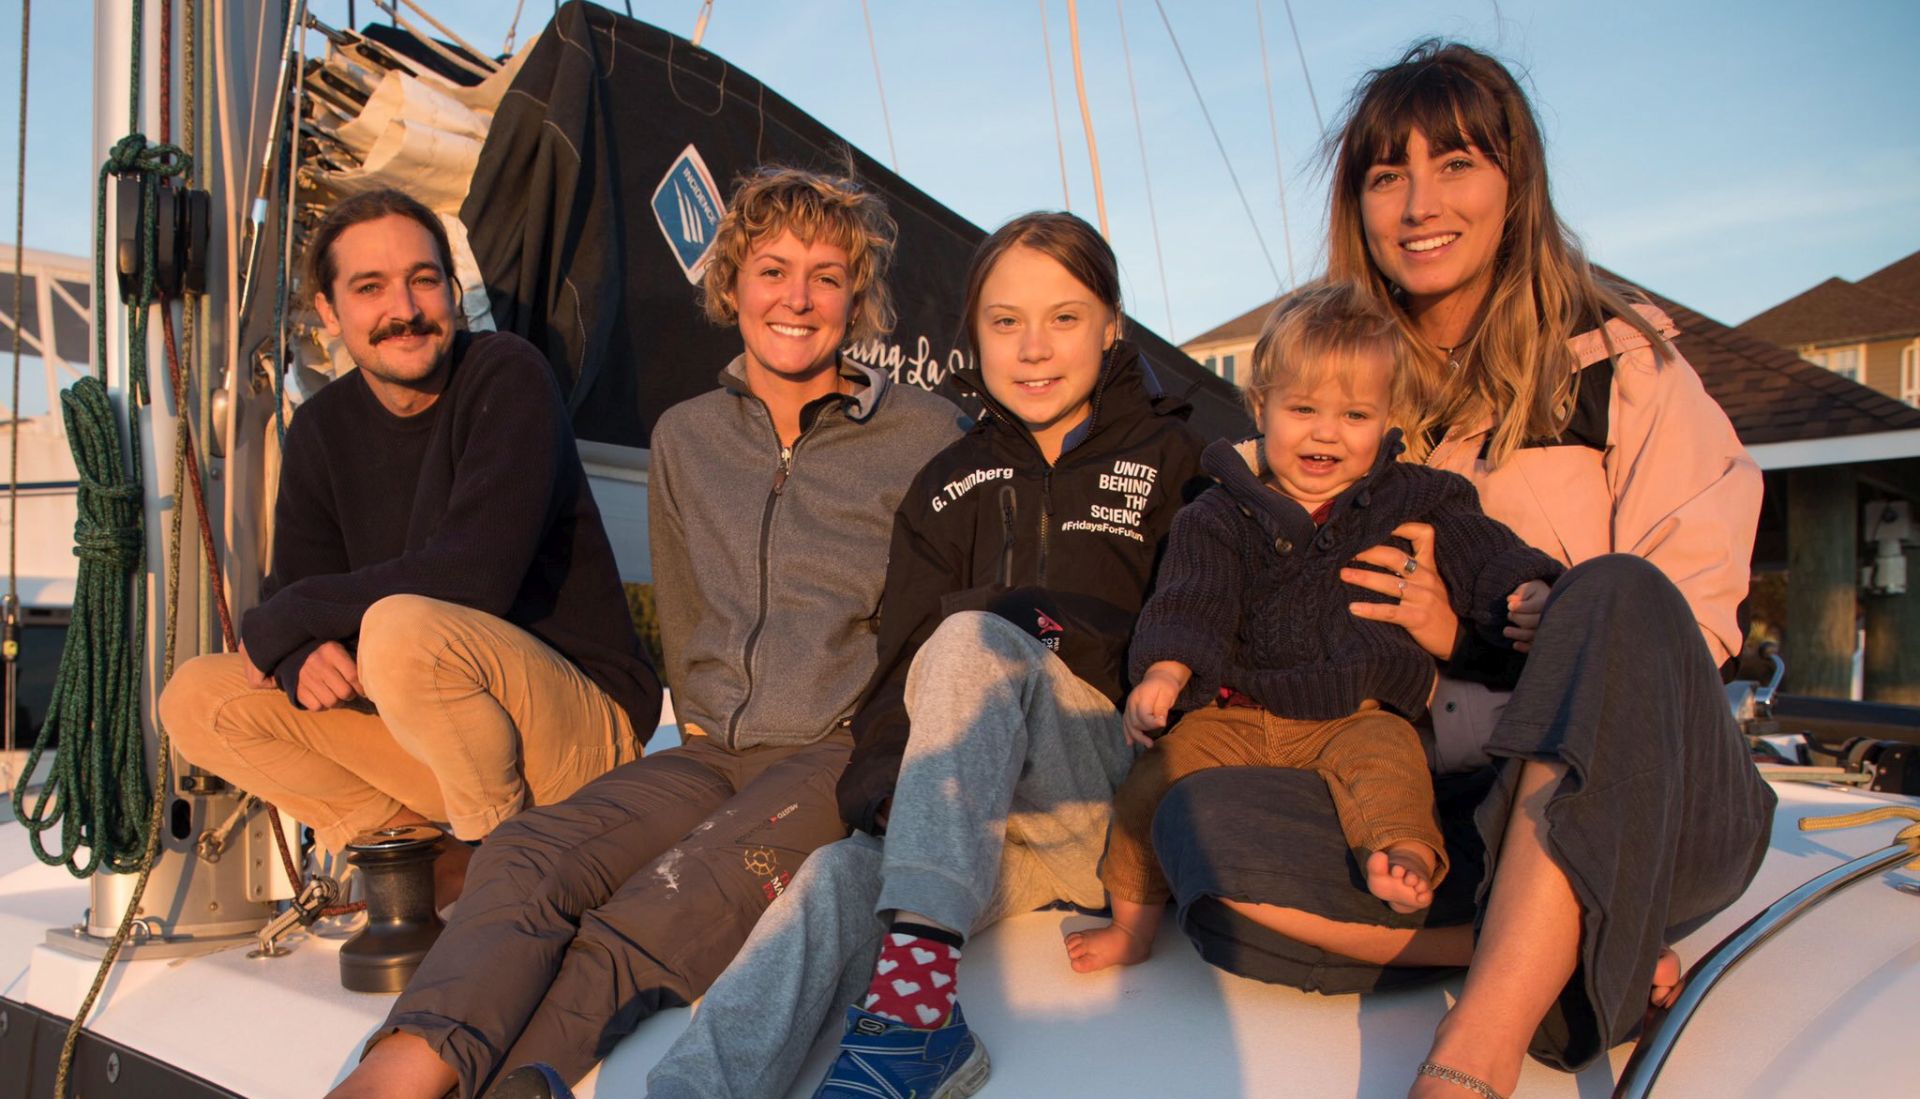 epa07992493 A handout photo made available by Greta Thunberg shows her (C) with Australian couple Riley Whitelum (L) and Elayna Carausu (R), and English skipper Nikki Henderson (2-L) on board the catamaran La Vagabonde at an undisclosed location in Virginia, USA, 12 November 2019 (issued 13 November 2019). Swedish climate activist Greta Thunberg is to set sail for Europa to take part in the COP25 climate summit in Madrid in early December.  EPA/GRETA THUNBERG HANDOUT  HANDOUT EDITORIAL USE ONLY/NO SALES